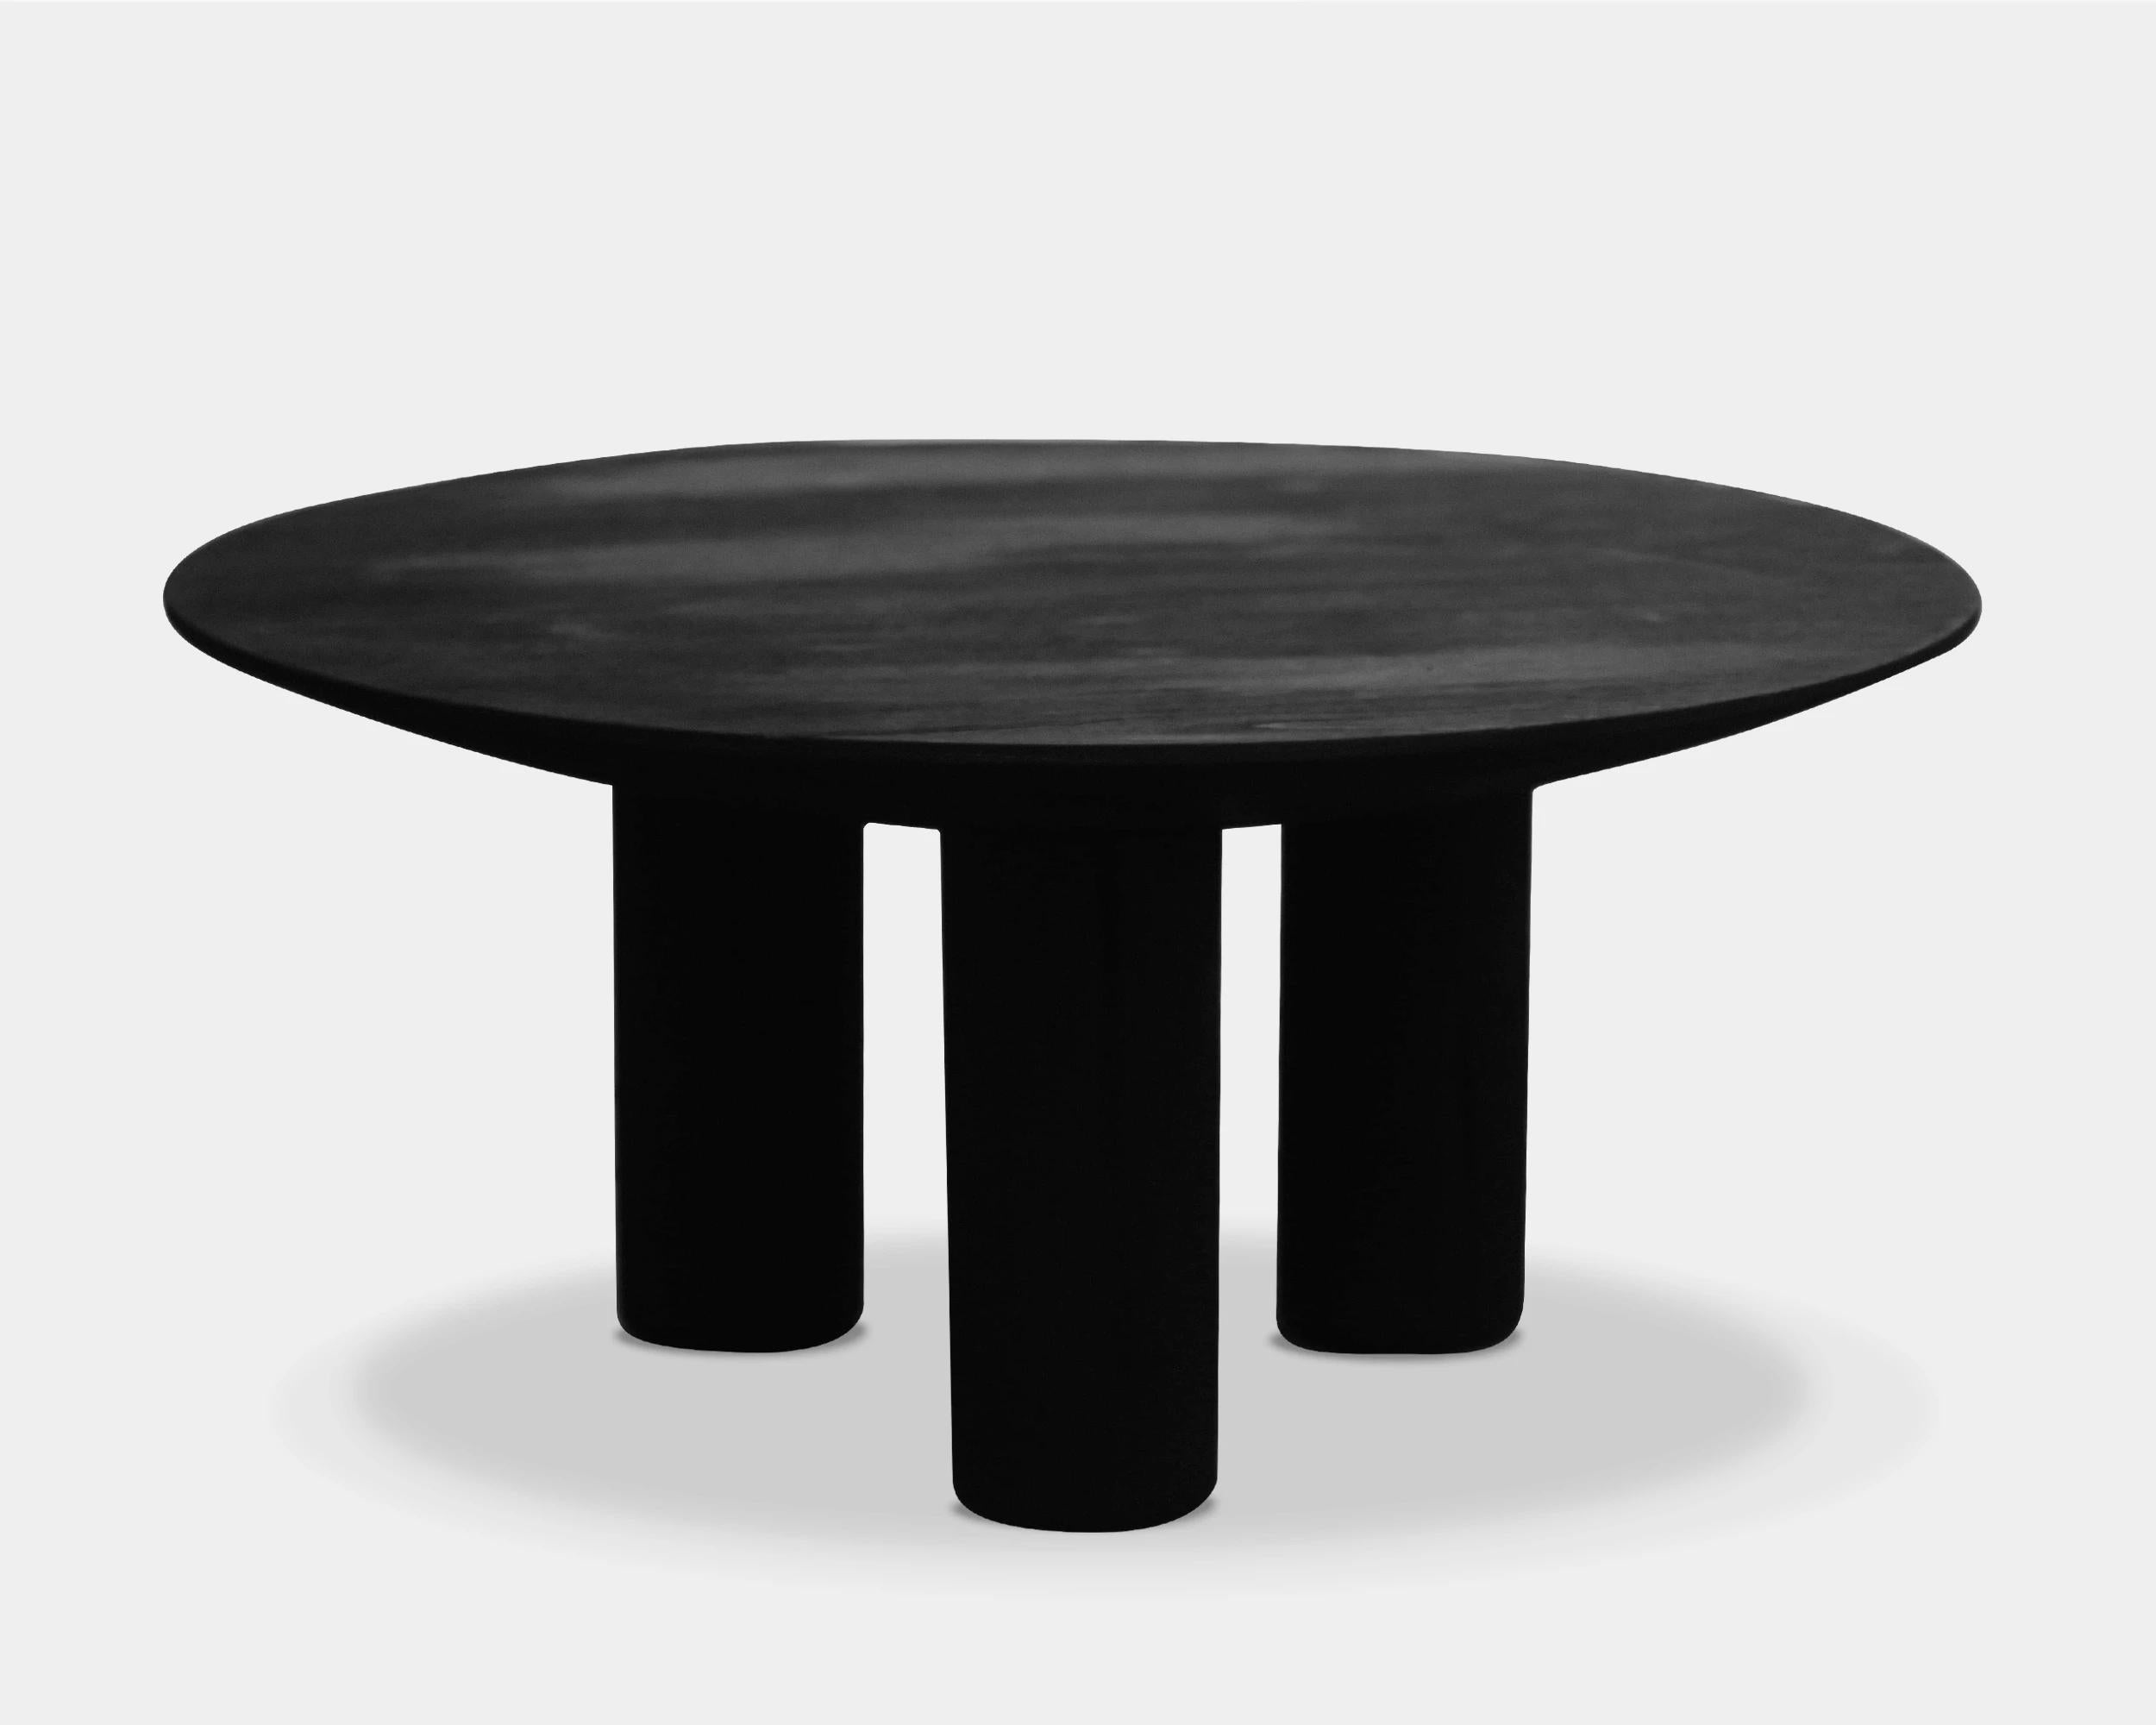 Coffee table Tenza 1 by Camilo Andres Rodriguez Marquez (aka CarmWorks)

Solid oak or cedar / Burnt wood or natural

Suitable for outdoor use

Each piece is made to order and hand crafted by the artist.

--
Camilo Andres Rodriguez Marquez